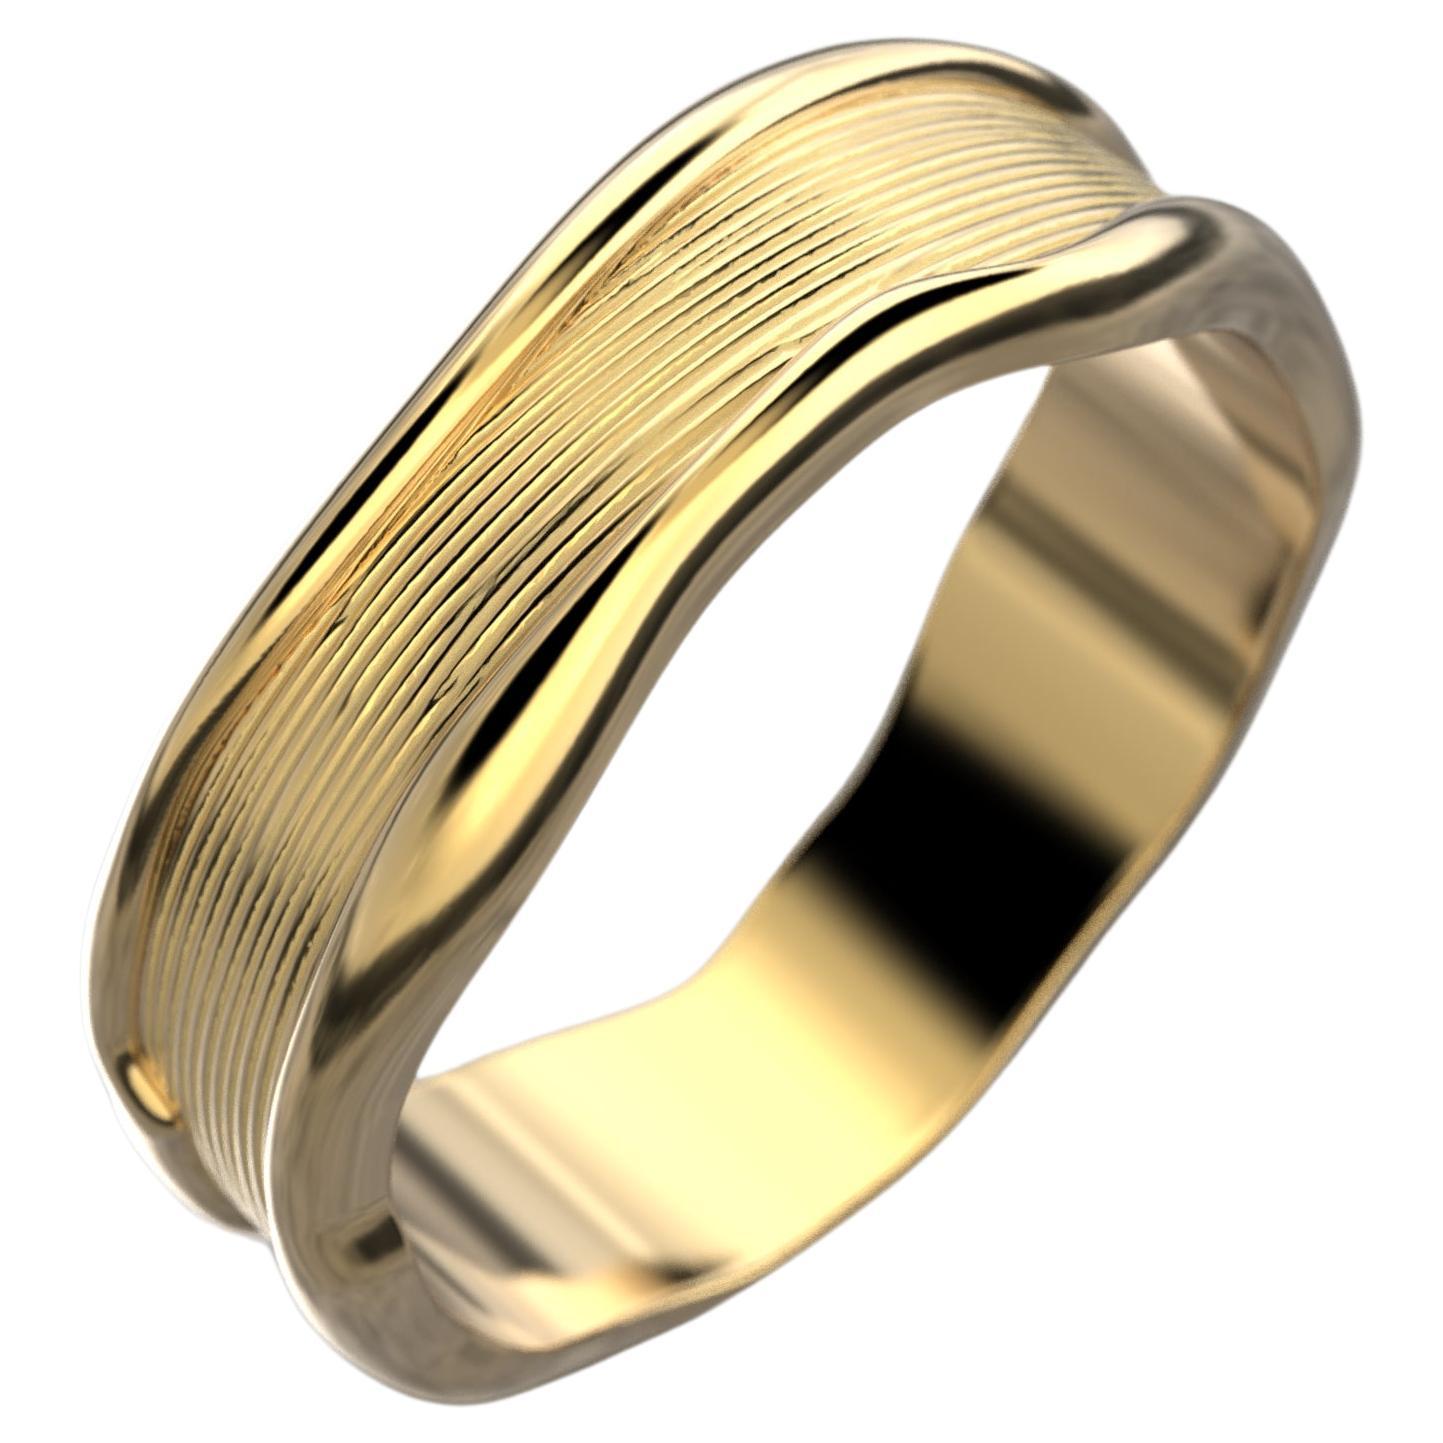 Unisex 18k Gold Band Ring with Hand-Engraved Organic Design Made in Italy